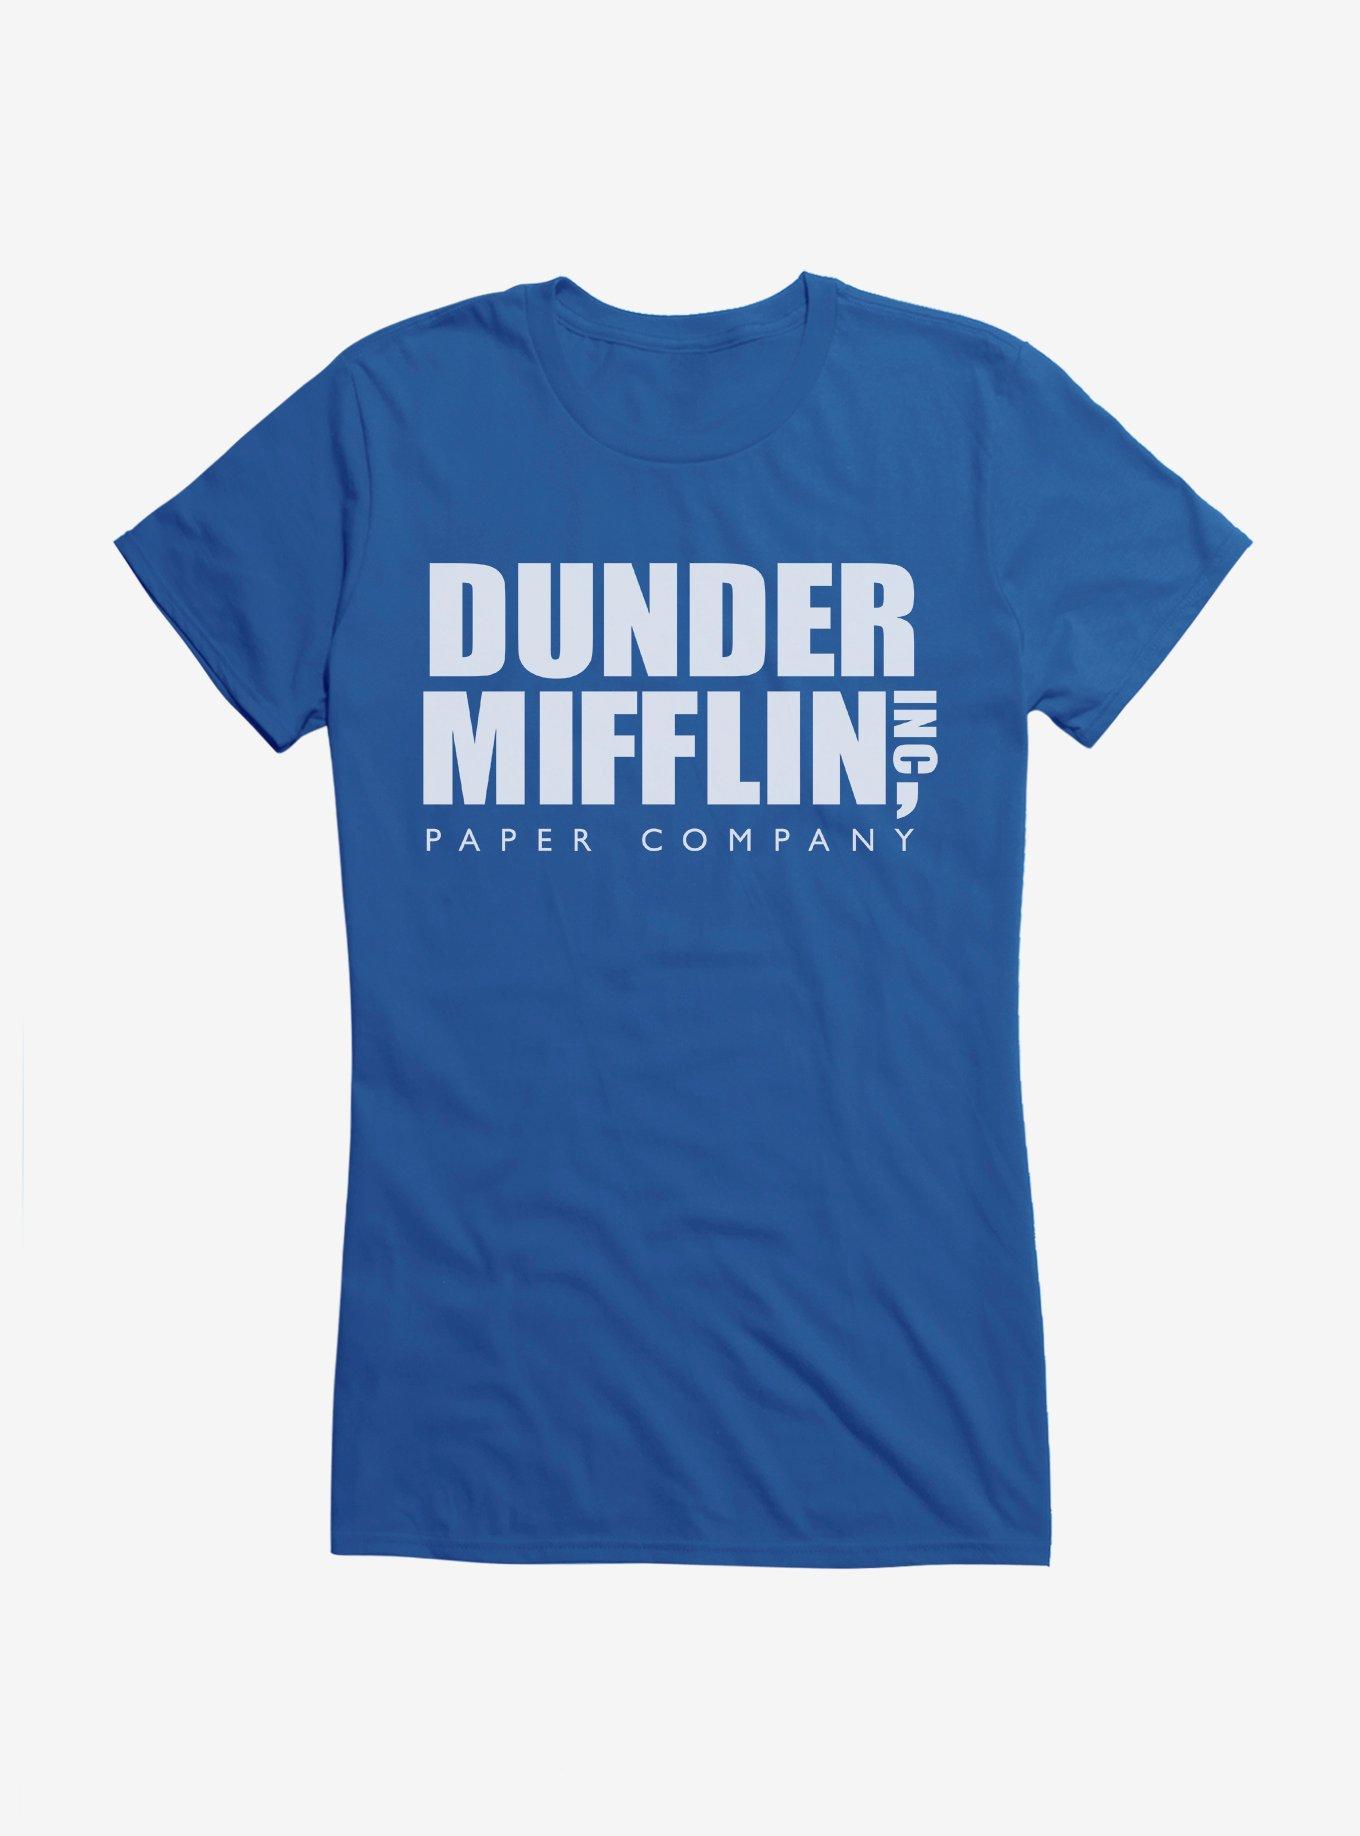 OFFICIAL The Office Merchandise & T-Shirts | Hot Topic